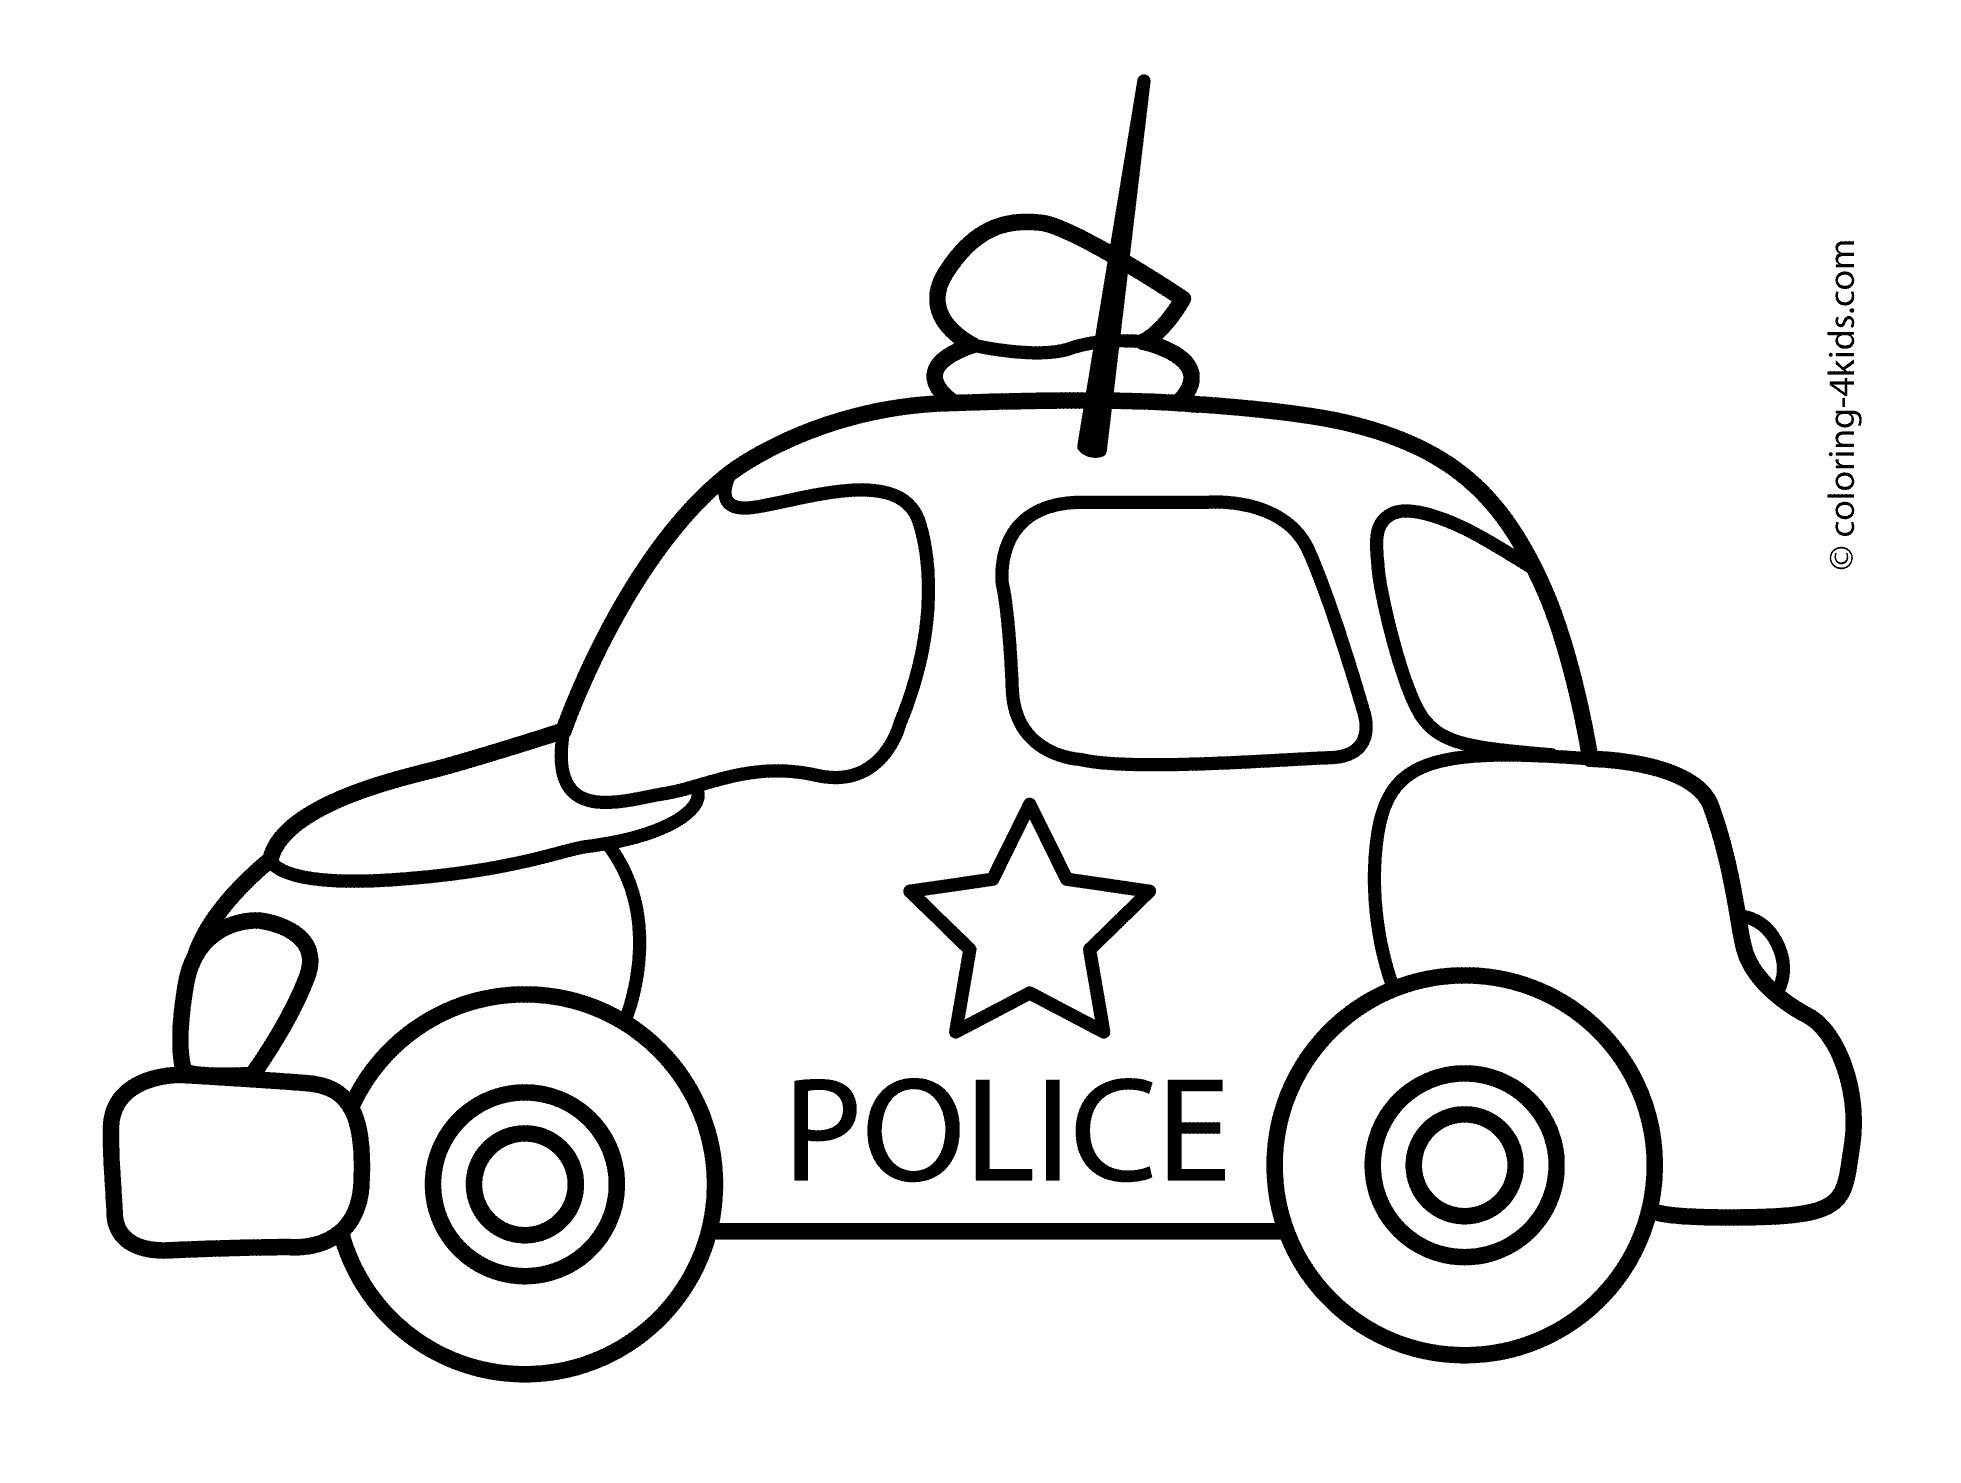 Car Coloring Pages For Toddlers
 Police car transportation coloring pages for kids